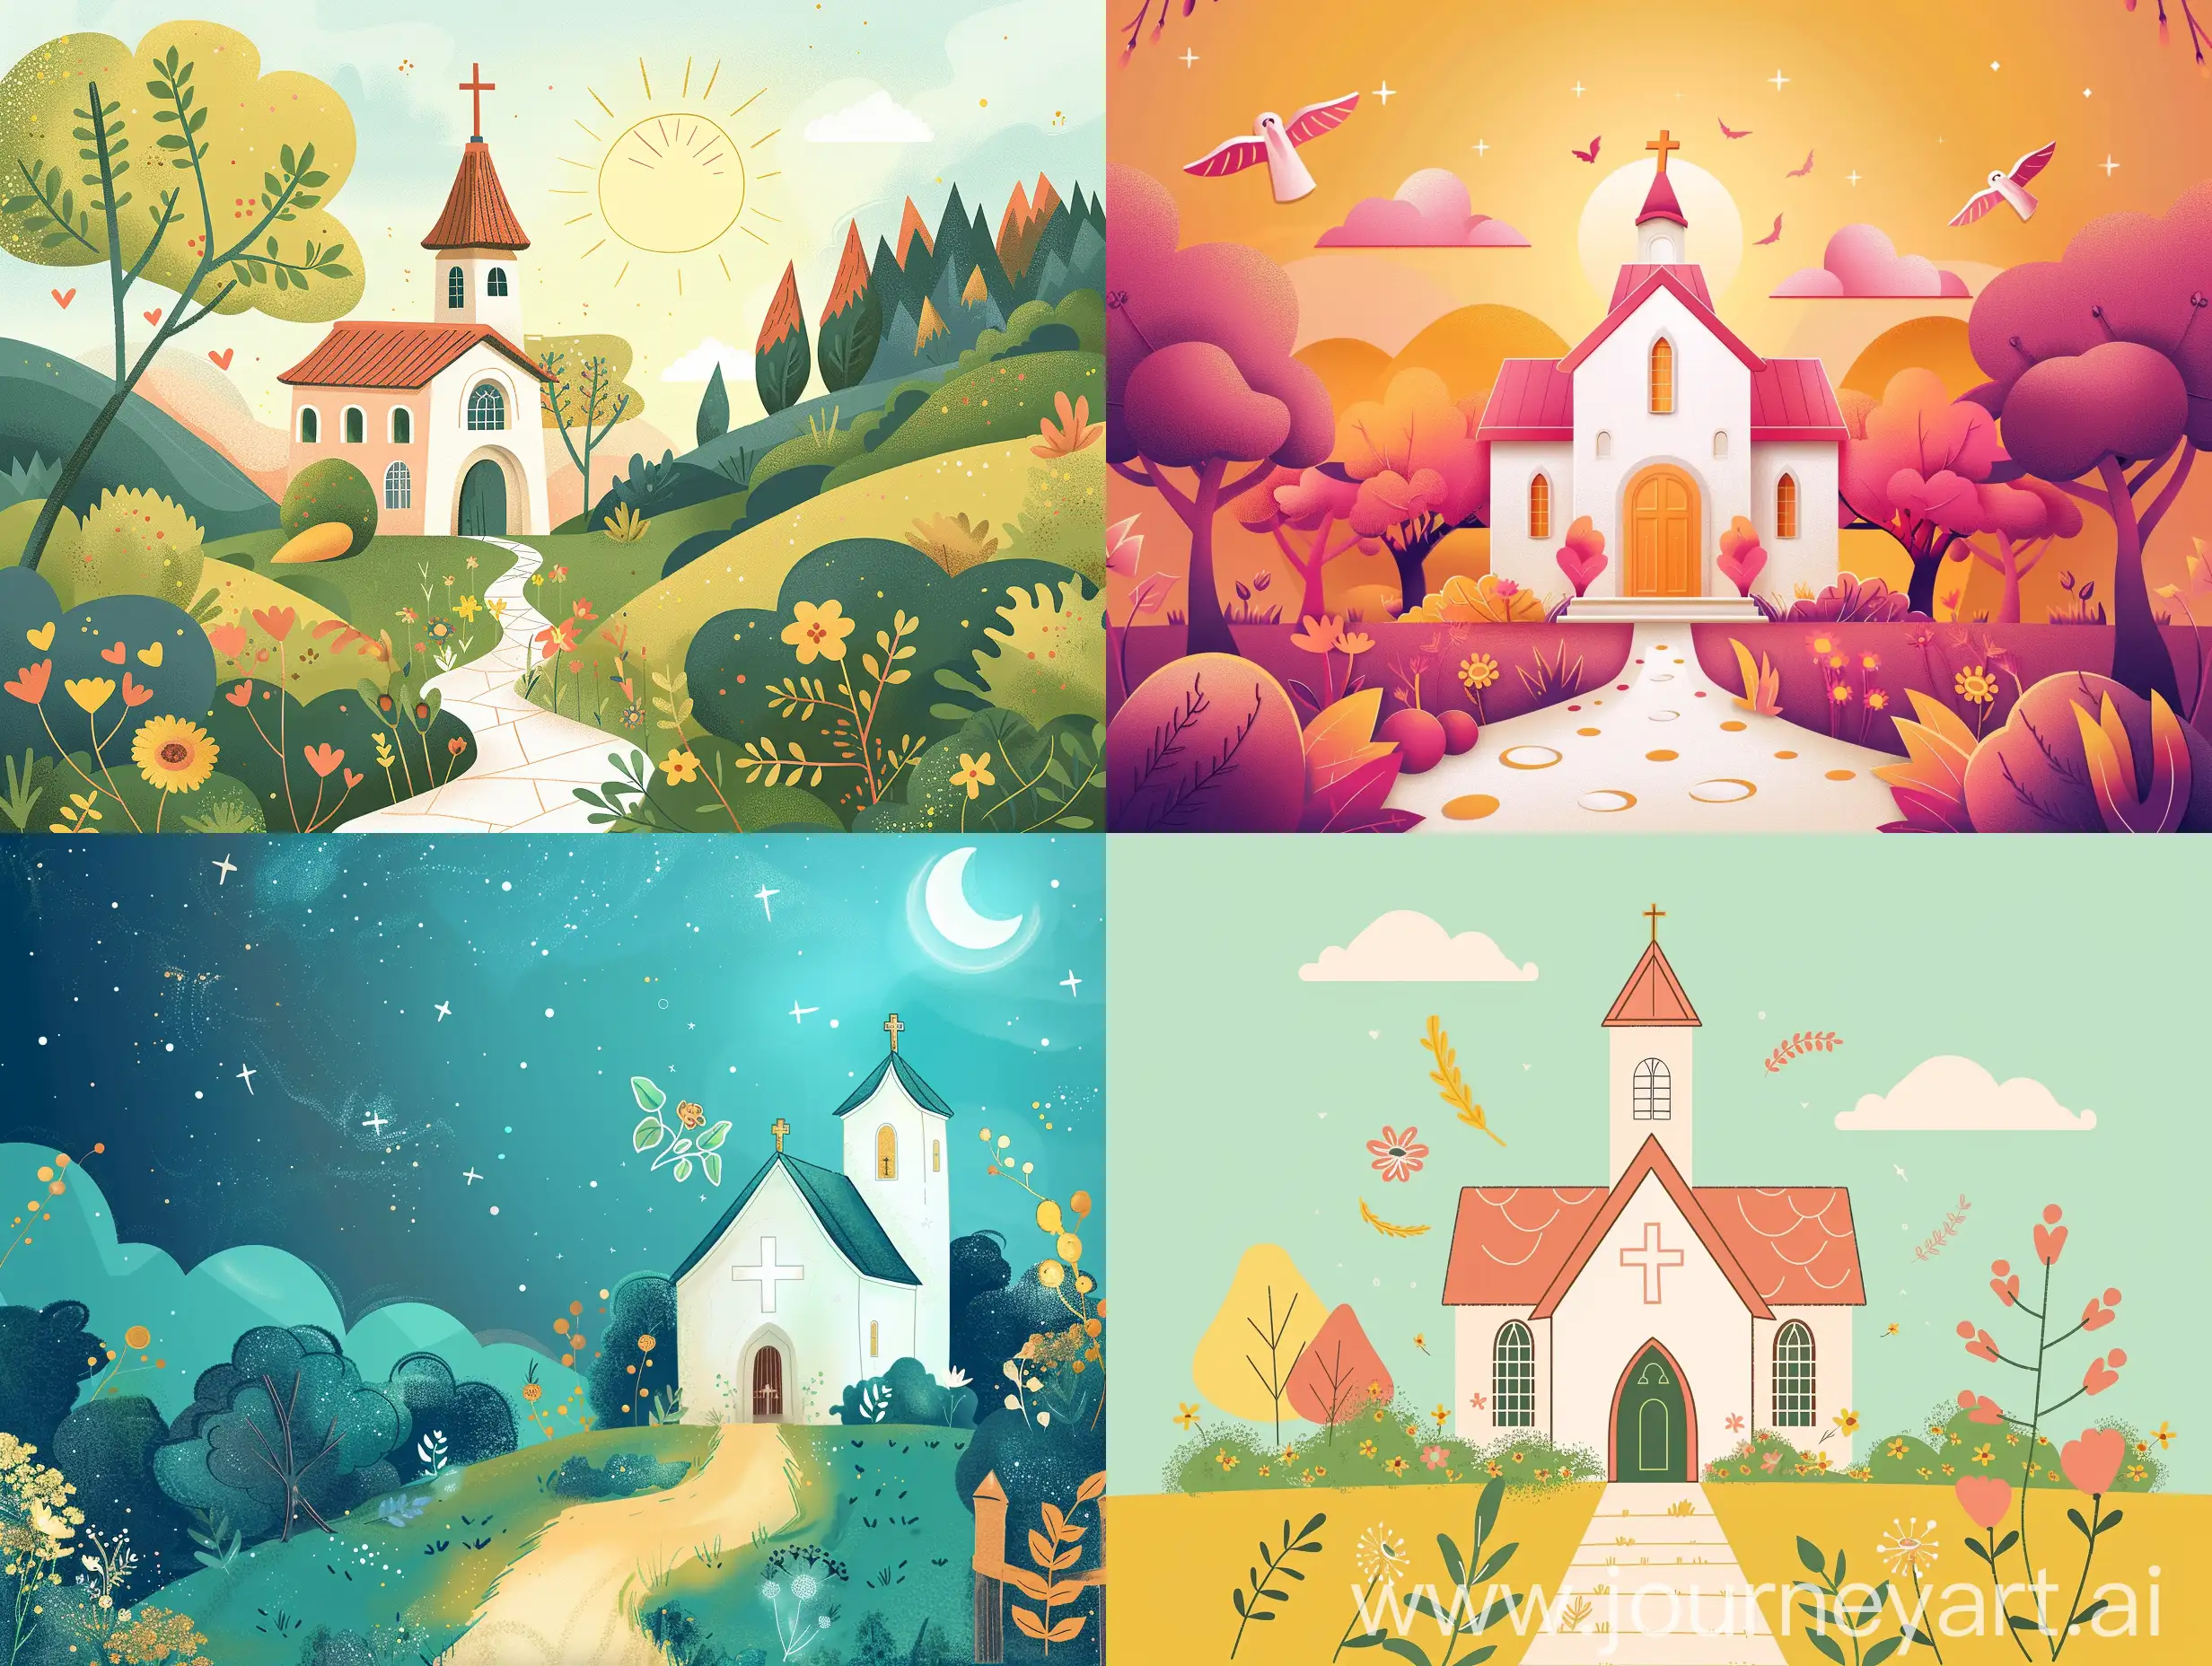 I need to create an invitation for a holy mass and farewell gathering. Include a church, graphical elements that symbolize farewell, new path in life and so on. Give me a simple background image that I can use for this.